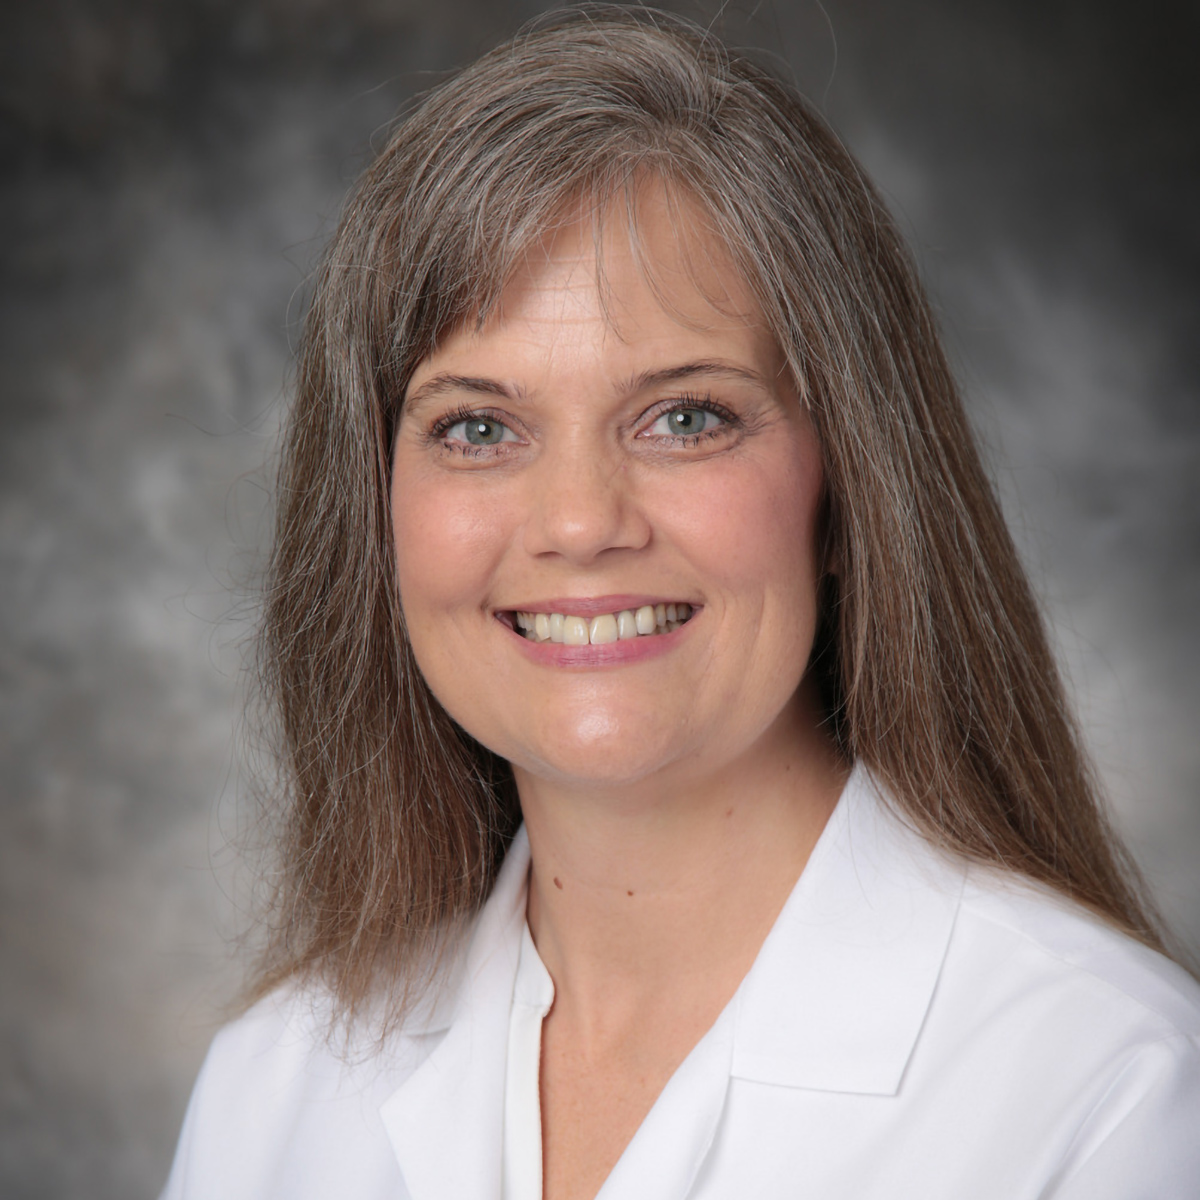 A friendly headshot of Janet Boone, MD